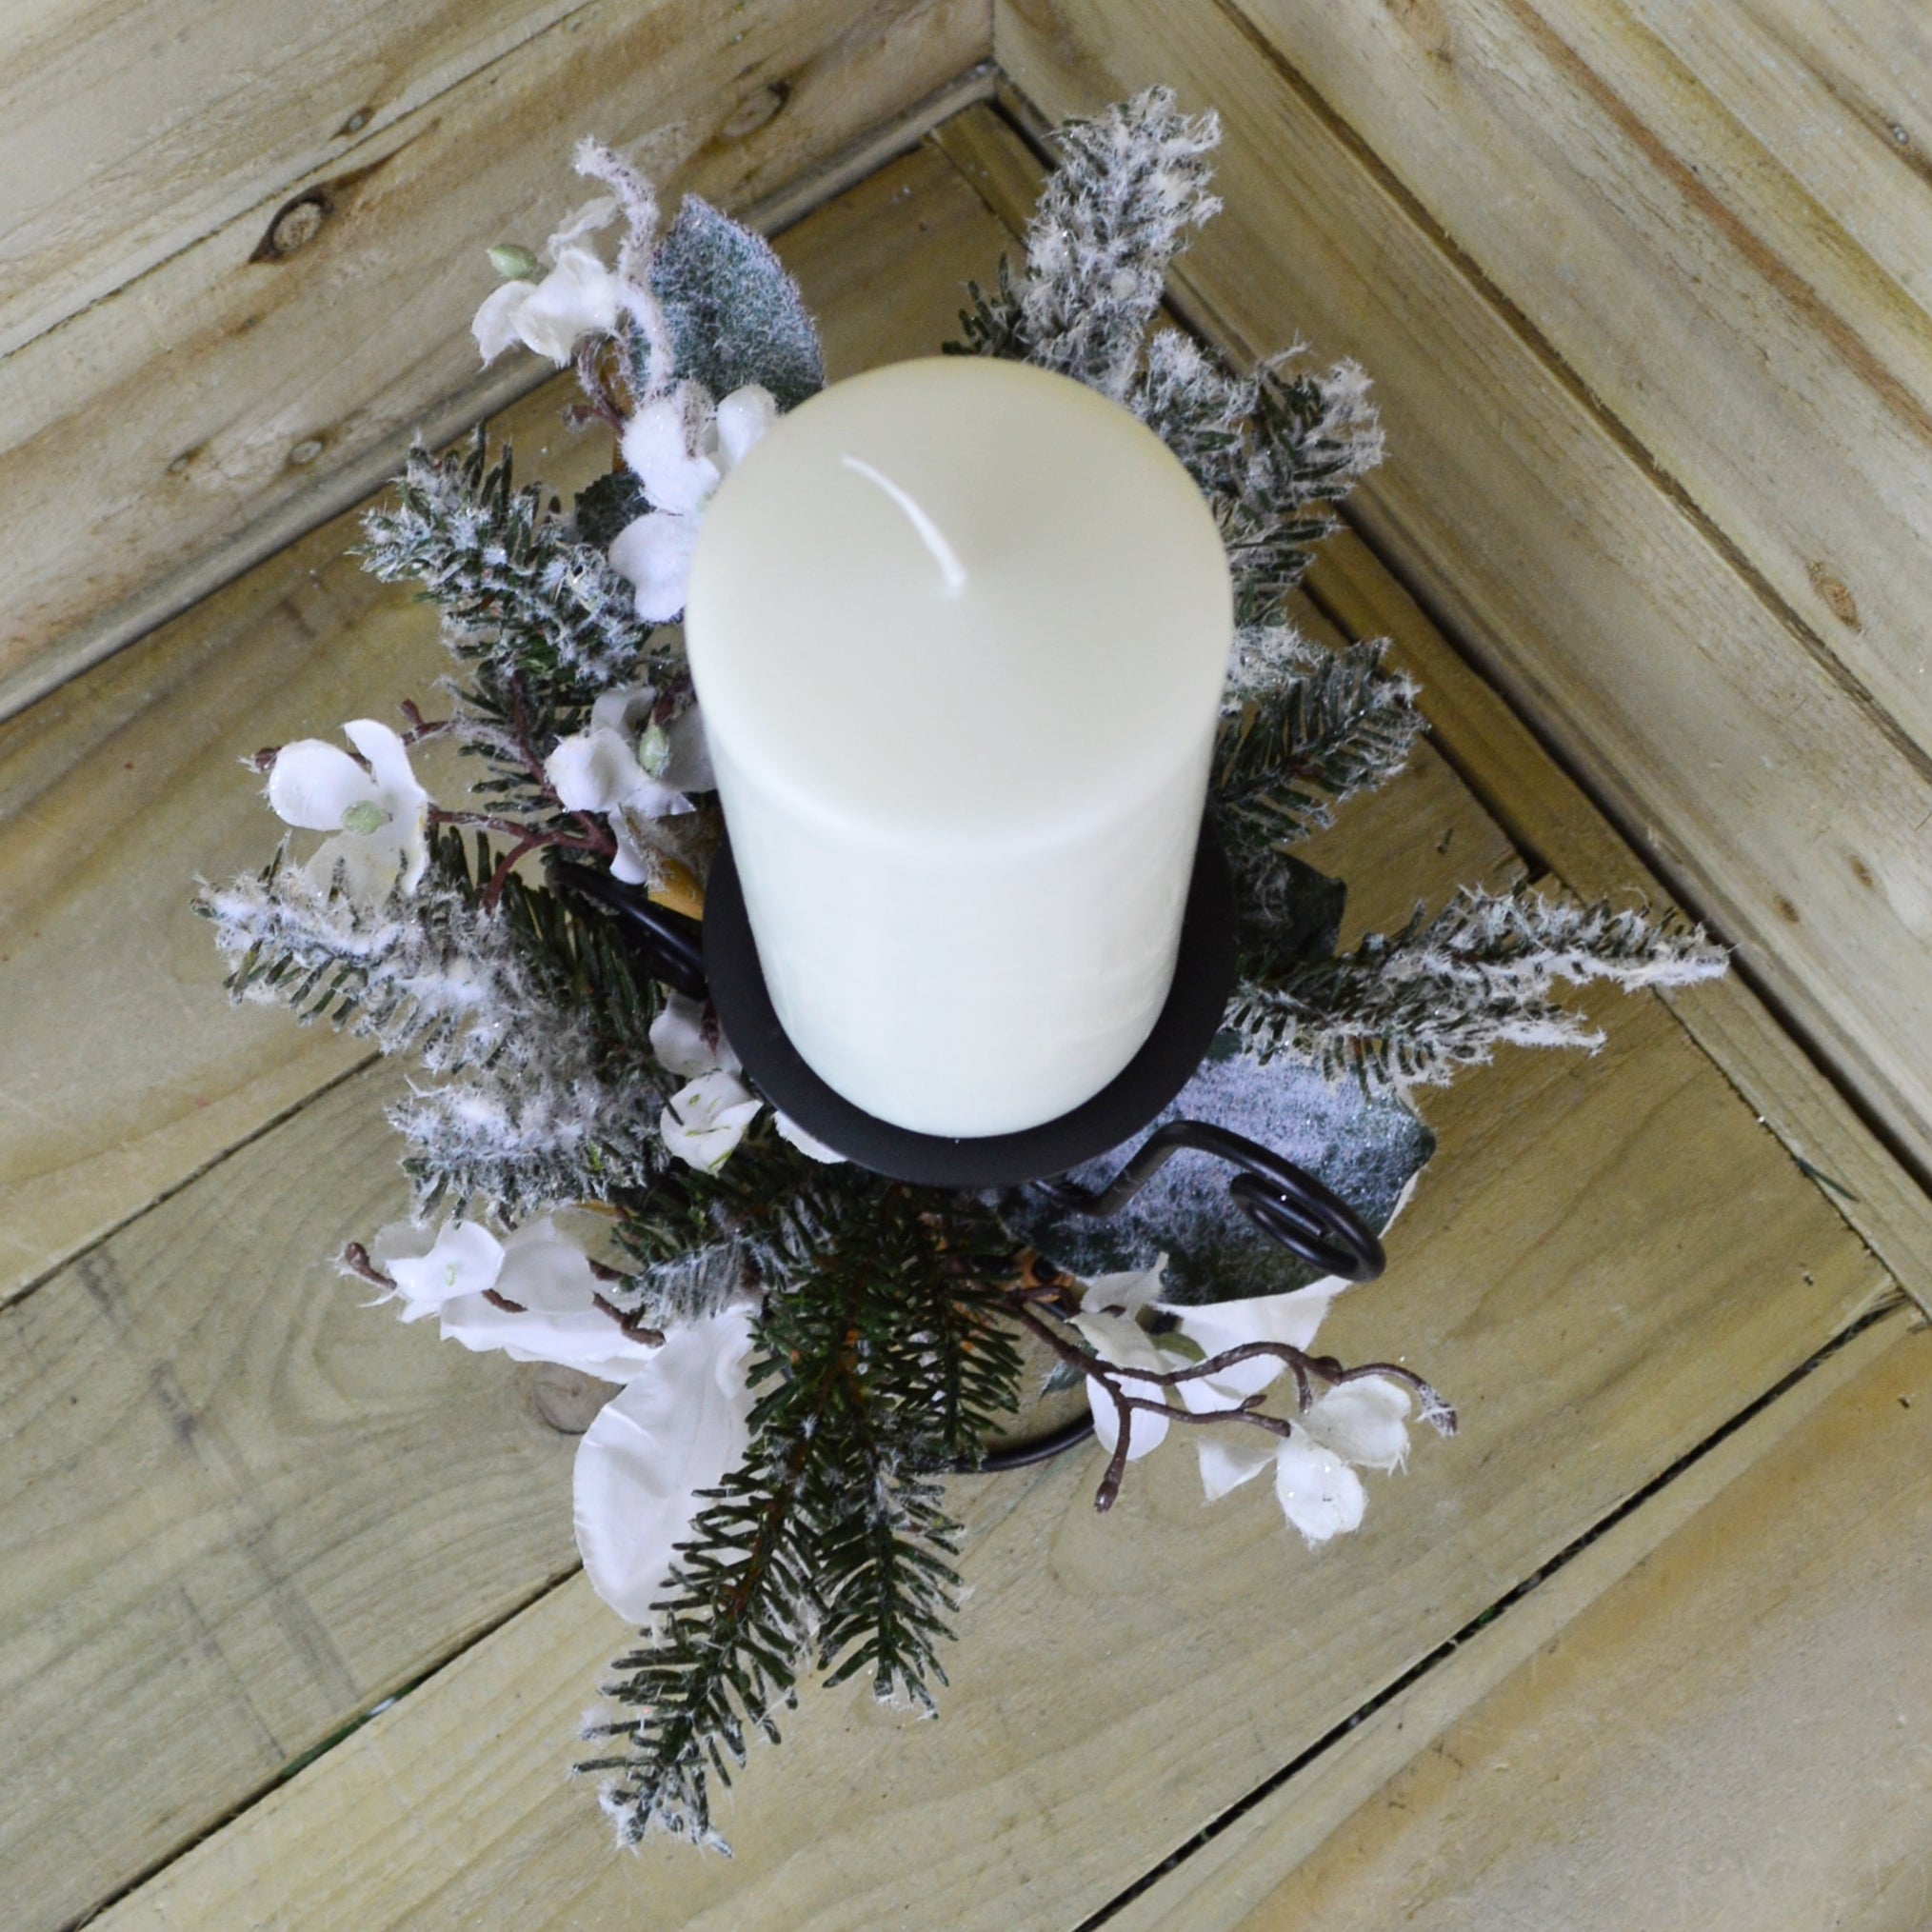 30cm Decorated Candle Holder Centrepiece with Snow Flocked Winter Flowers